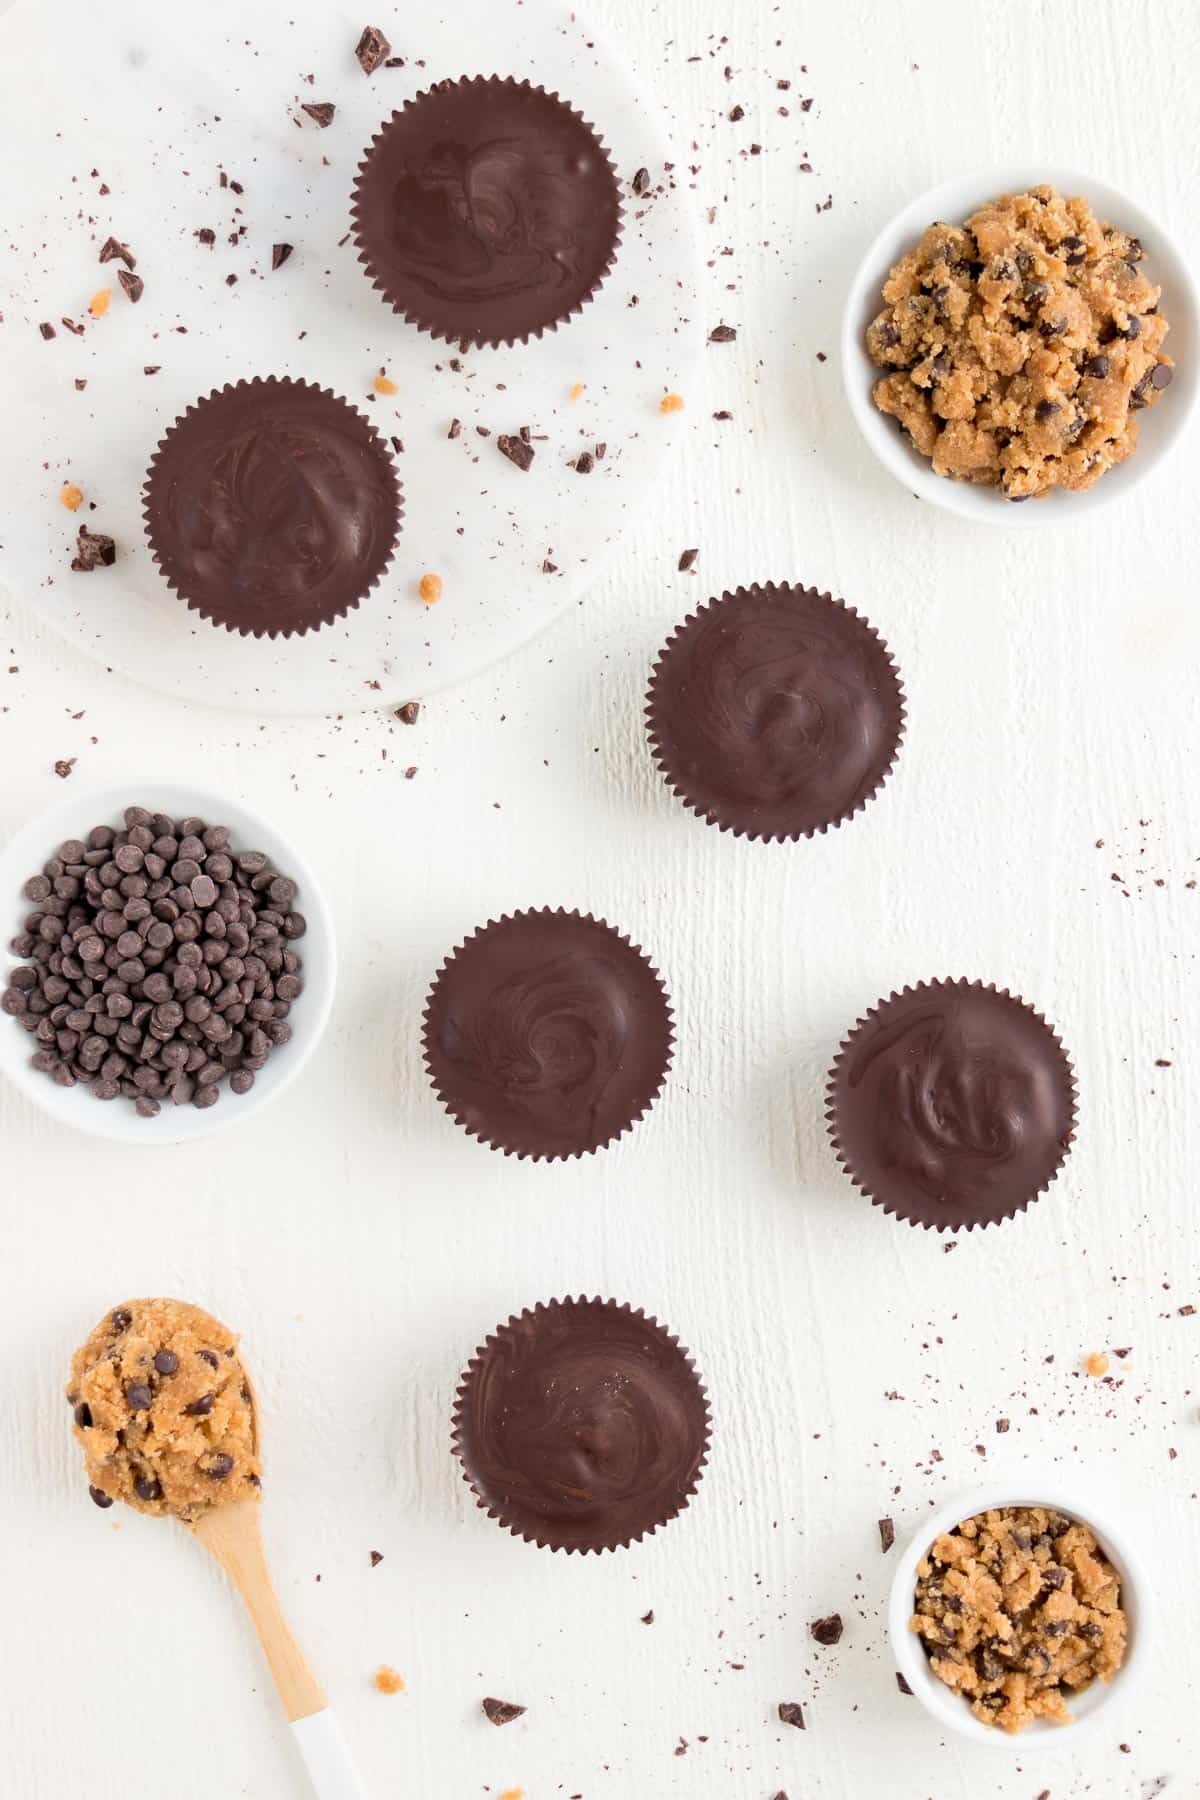 chocolate covered cookie dough cups surrounded by a wooden spoon, chocolate chips, and no bake cookie dough